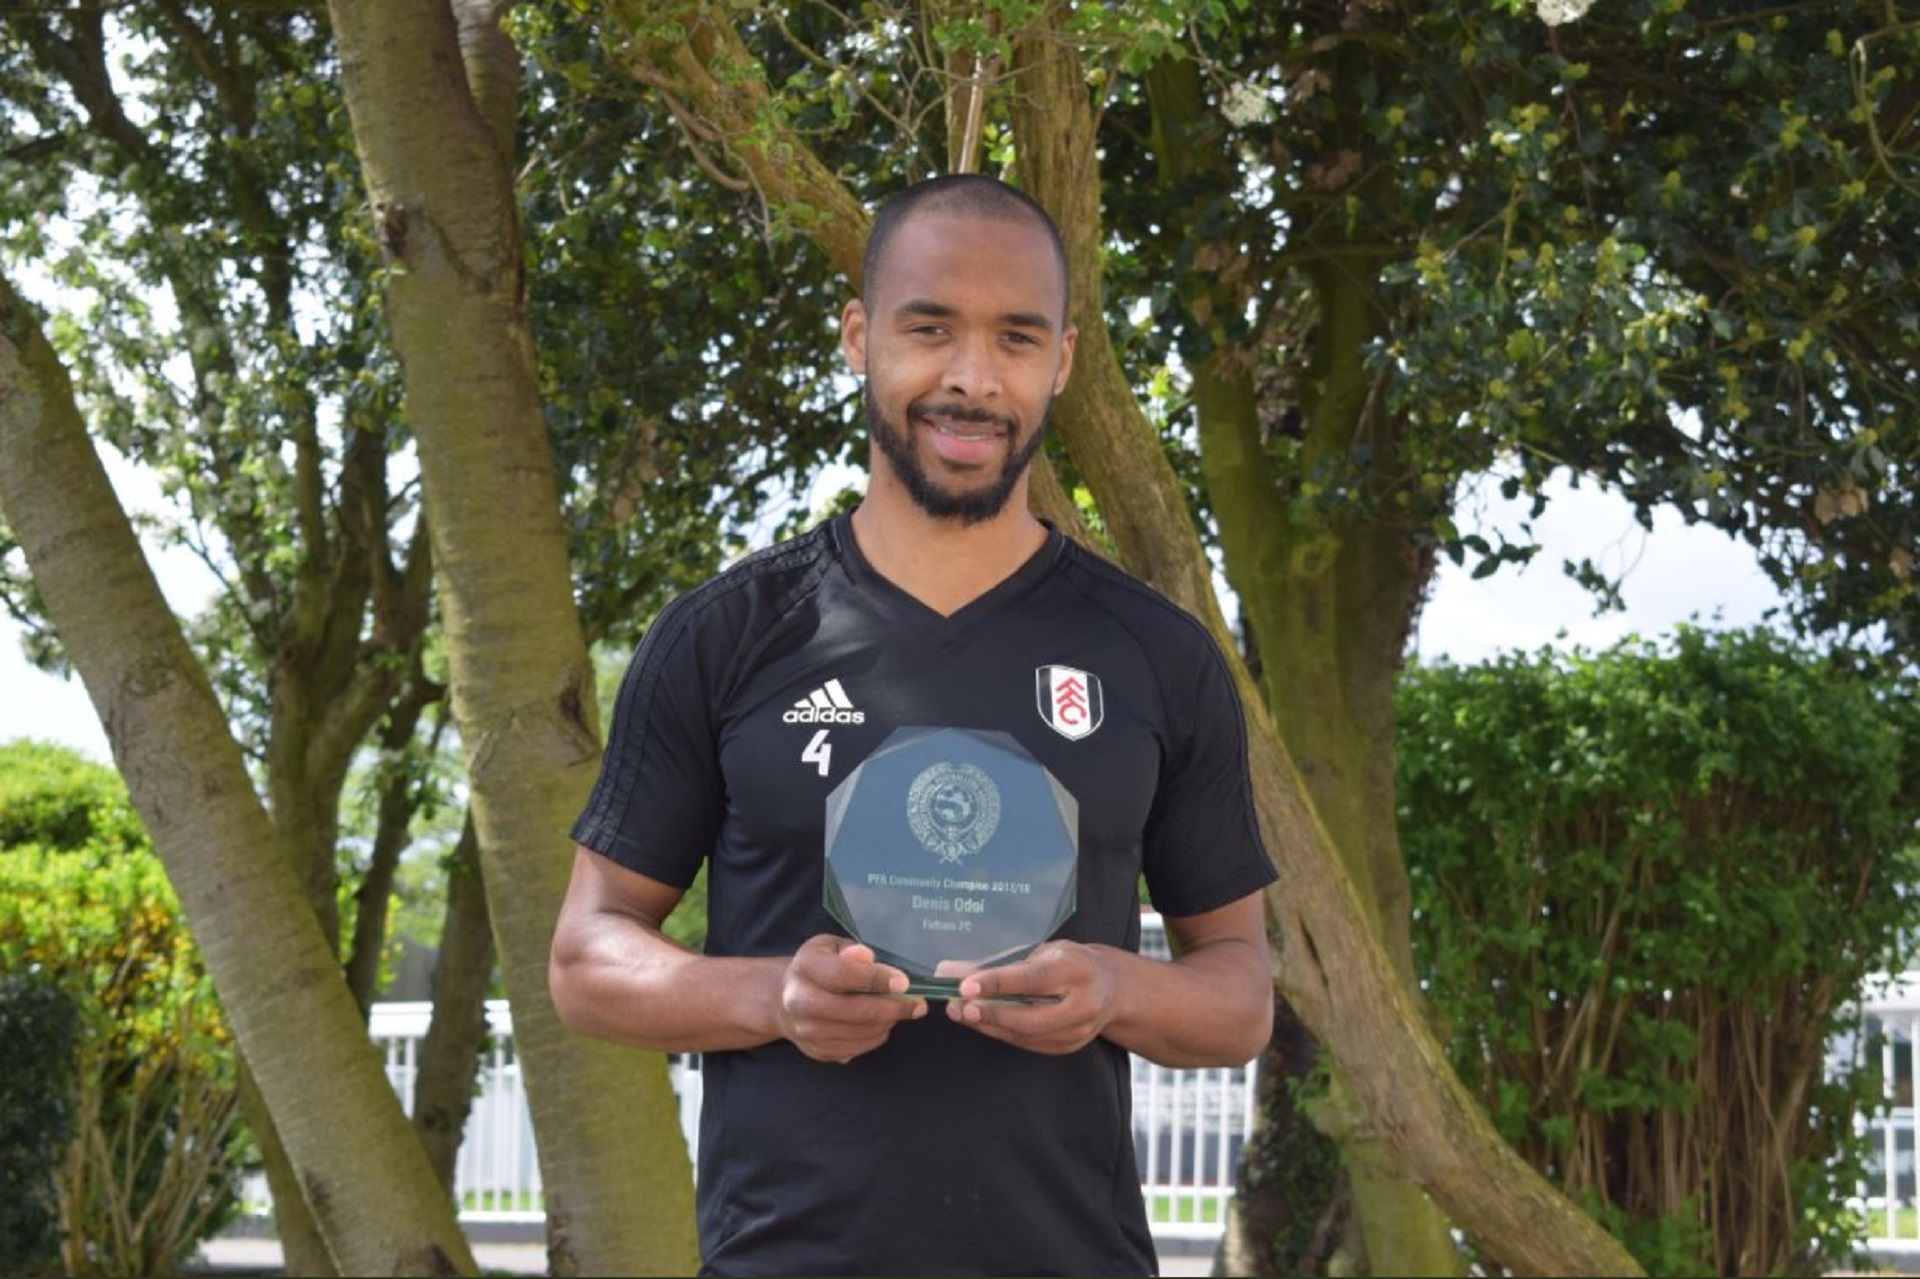 Players engagement for the Fulham FC Foundation awarded - EFDN